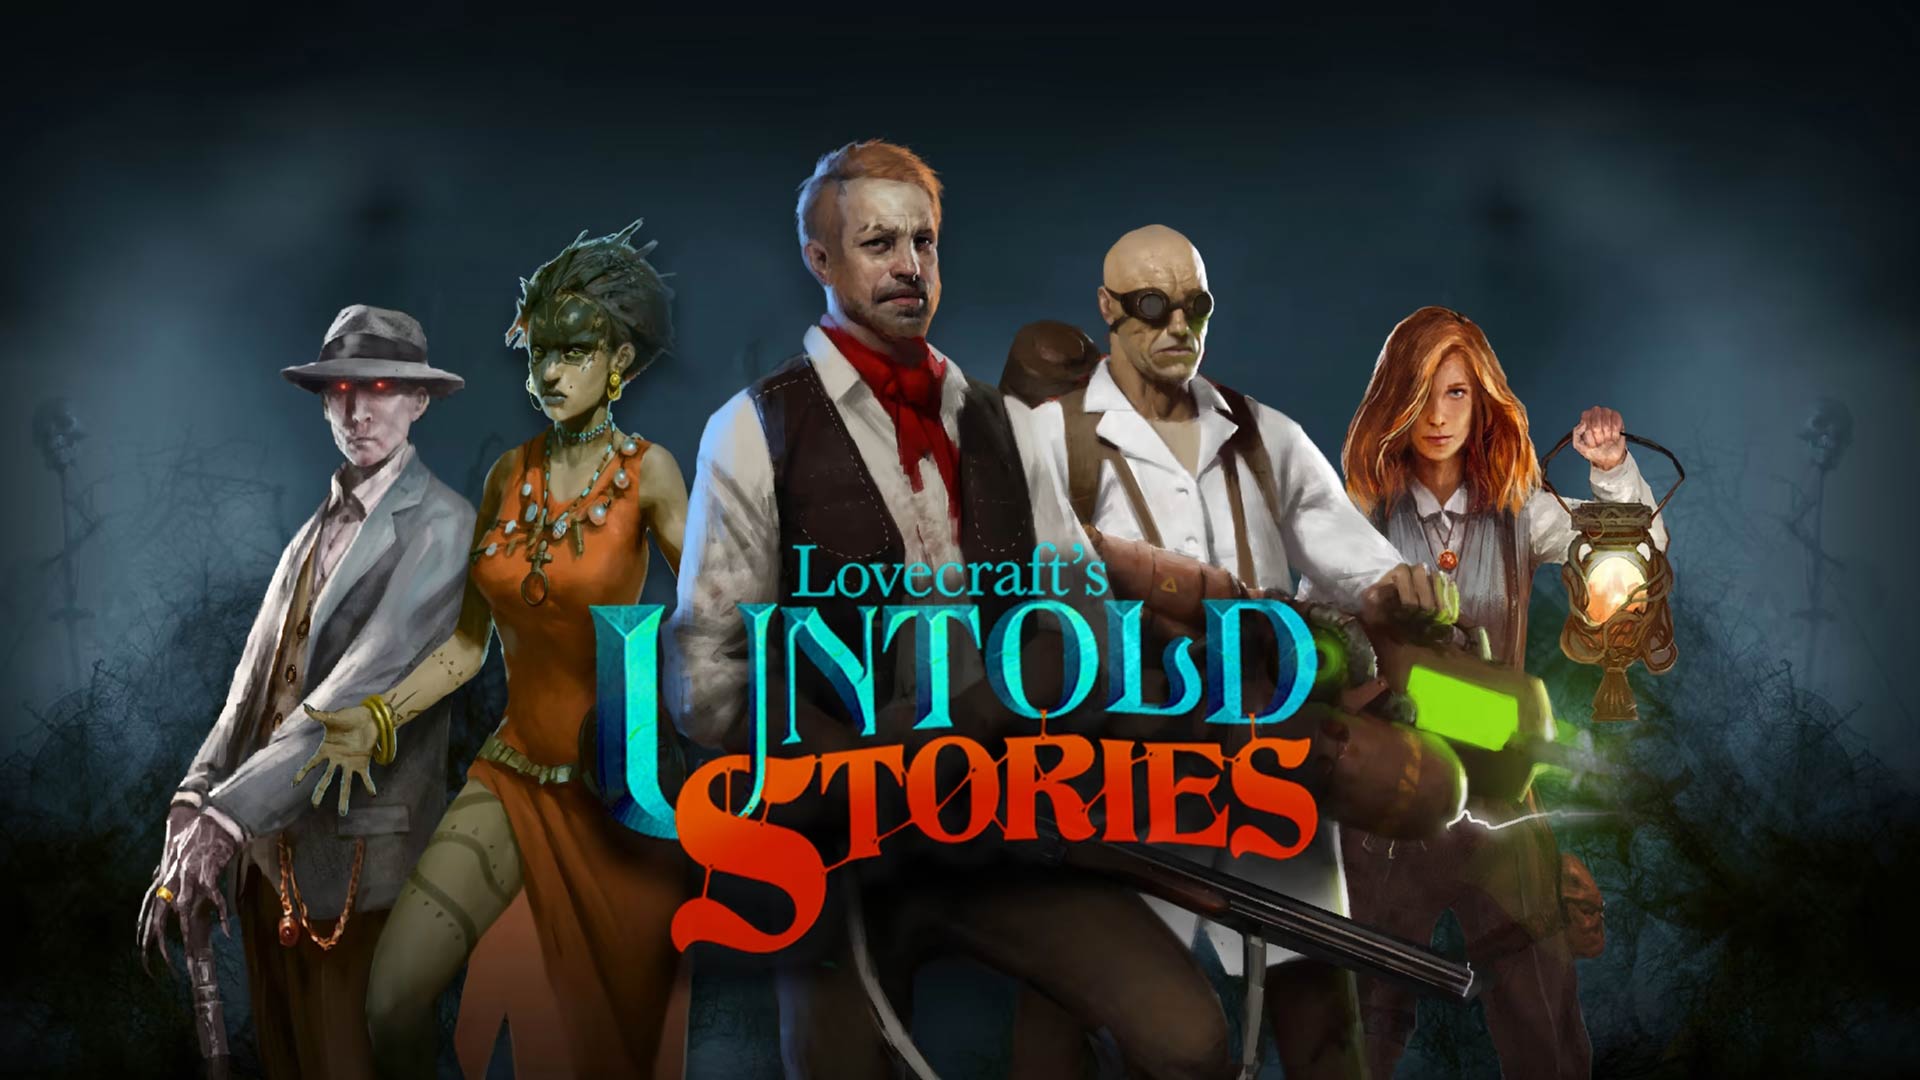 Lovecraft's Untold Stories is free on GOG